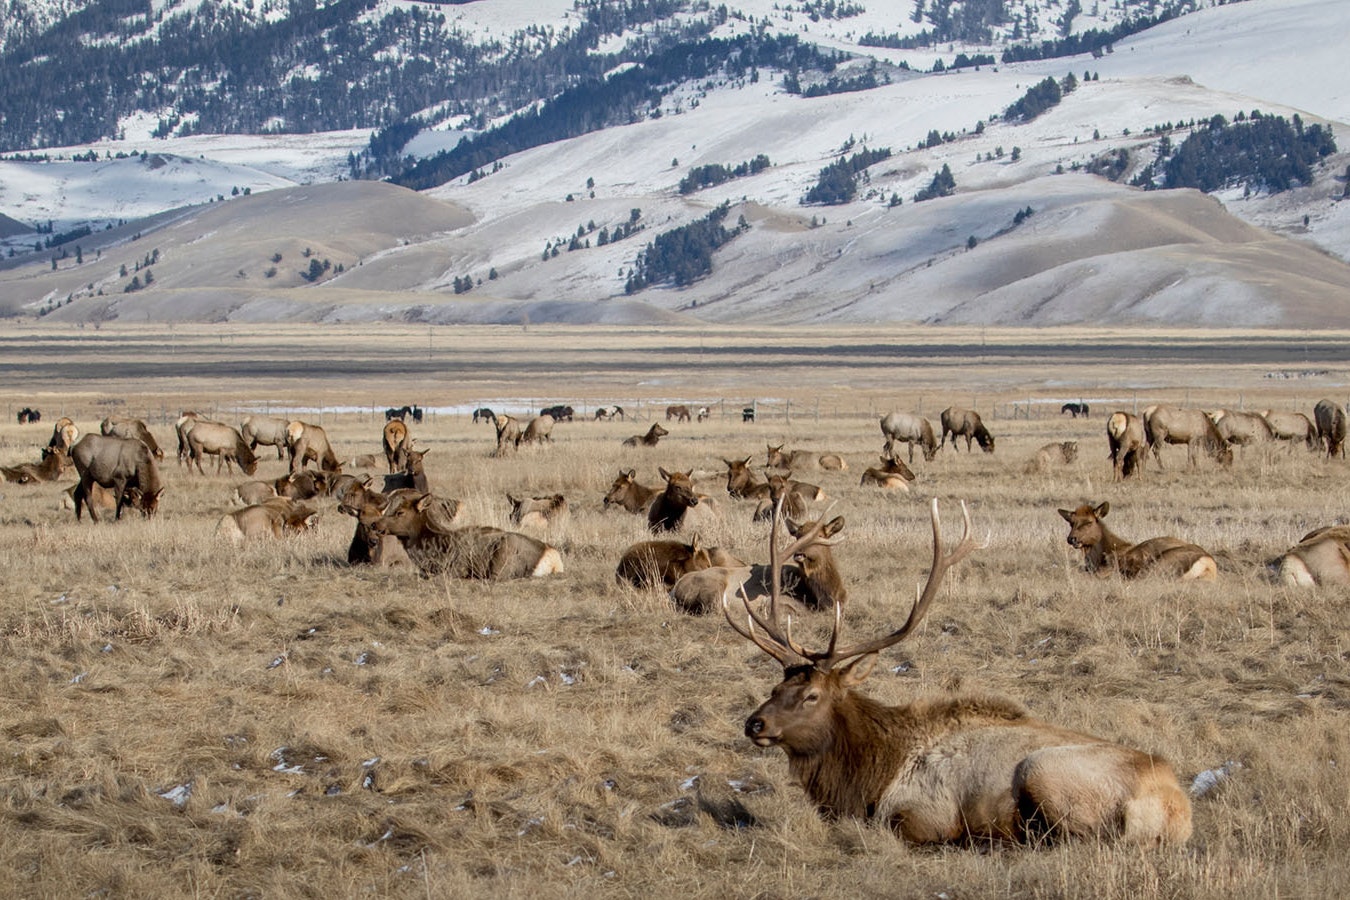 A herd of Wyoming elk take a break at the foot of the Grand Tetons.